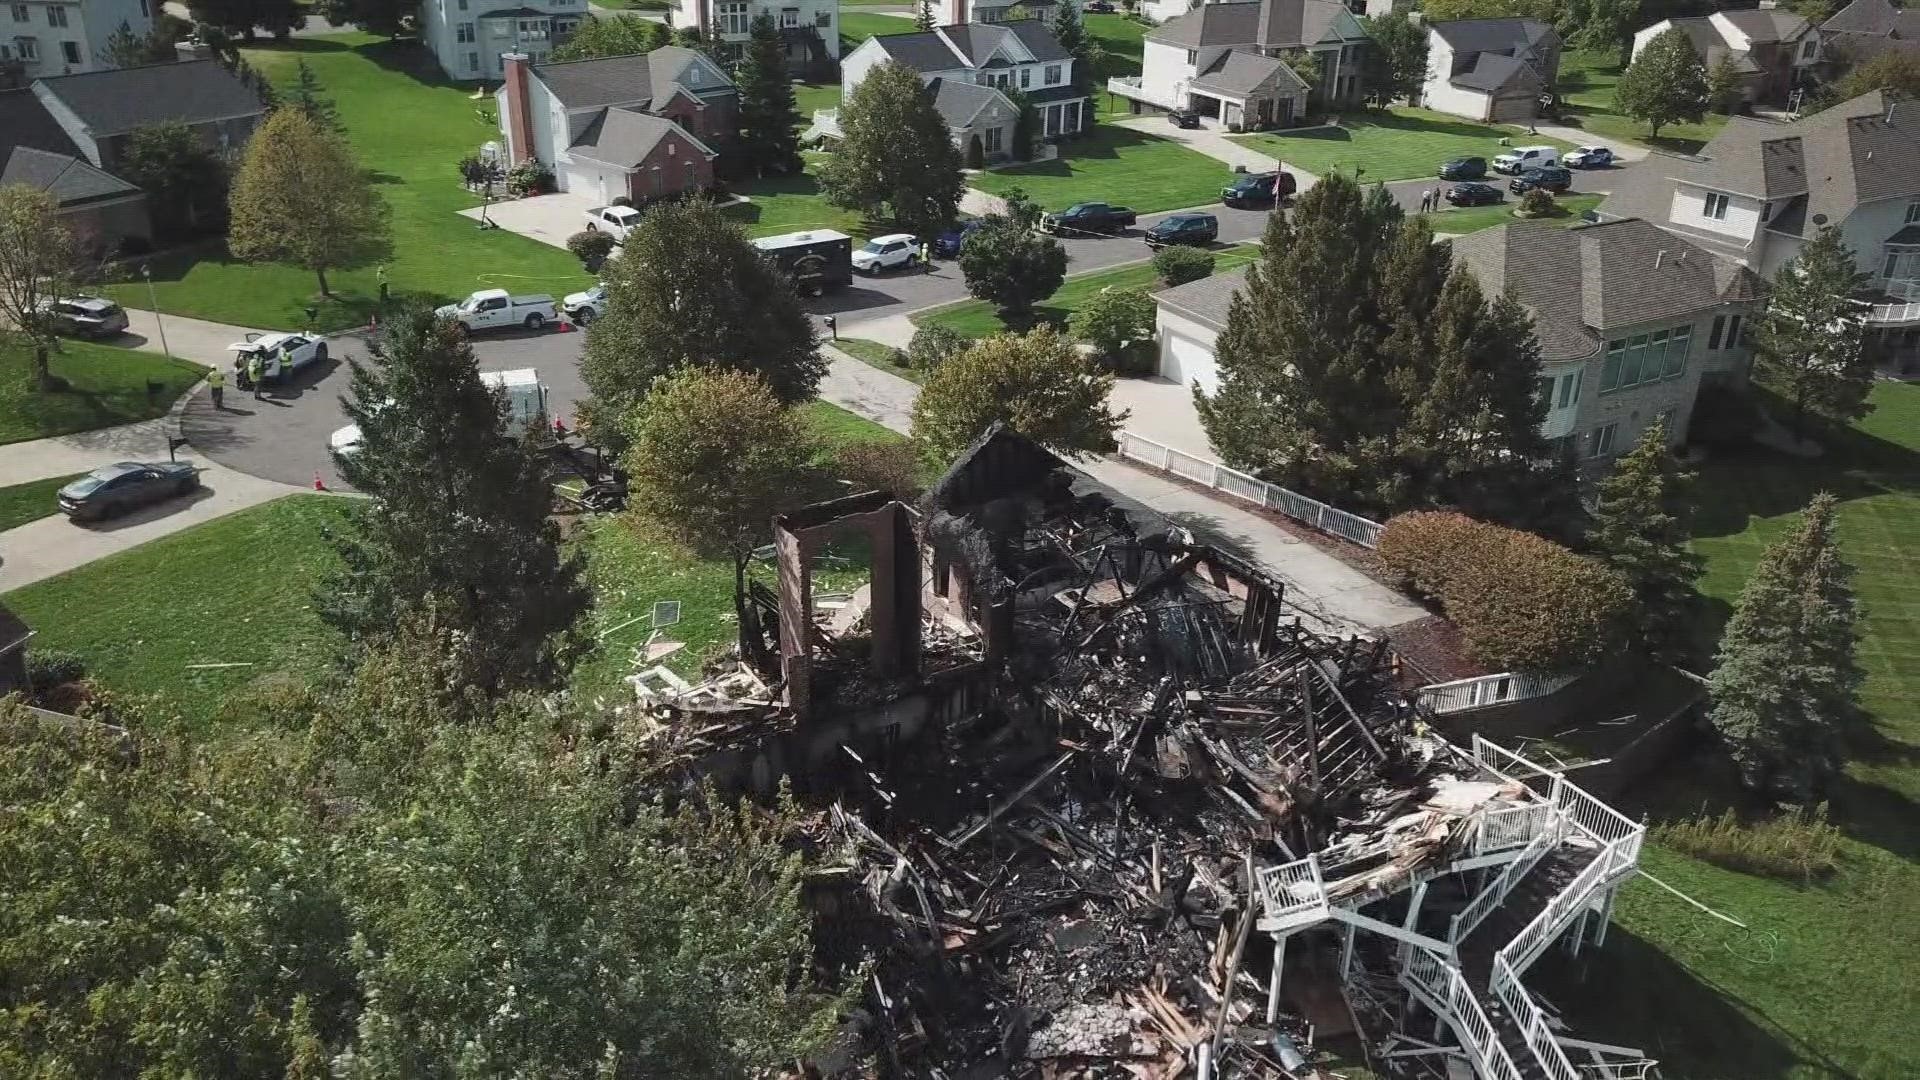 Daylight drone video shows the aftermath of a house explosion in Caledonia.